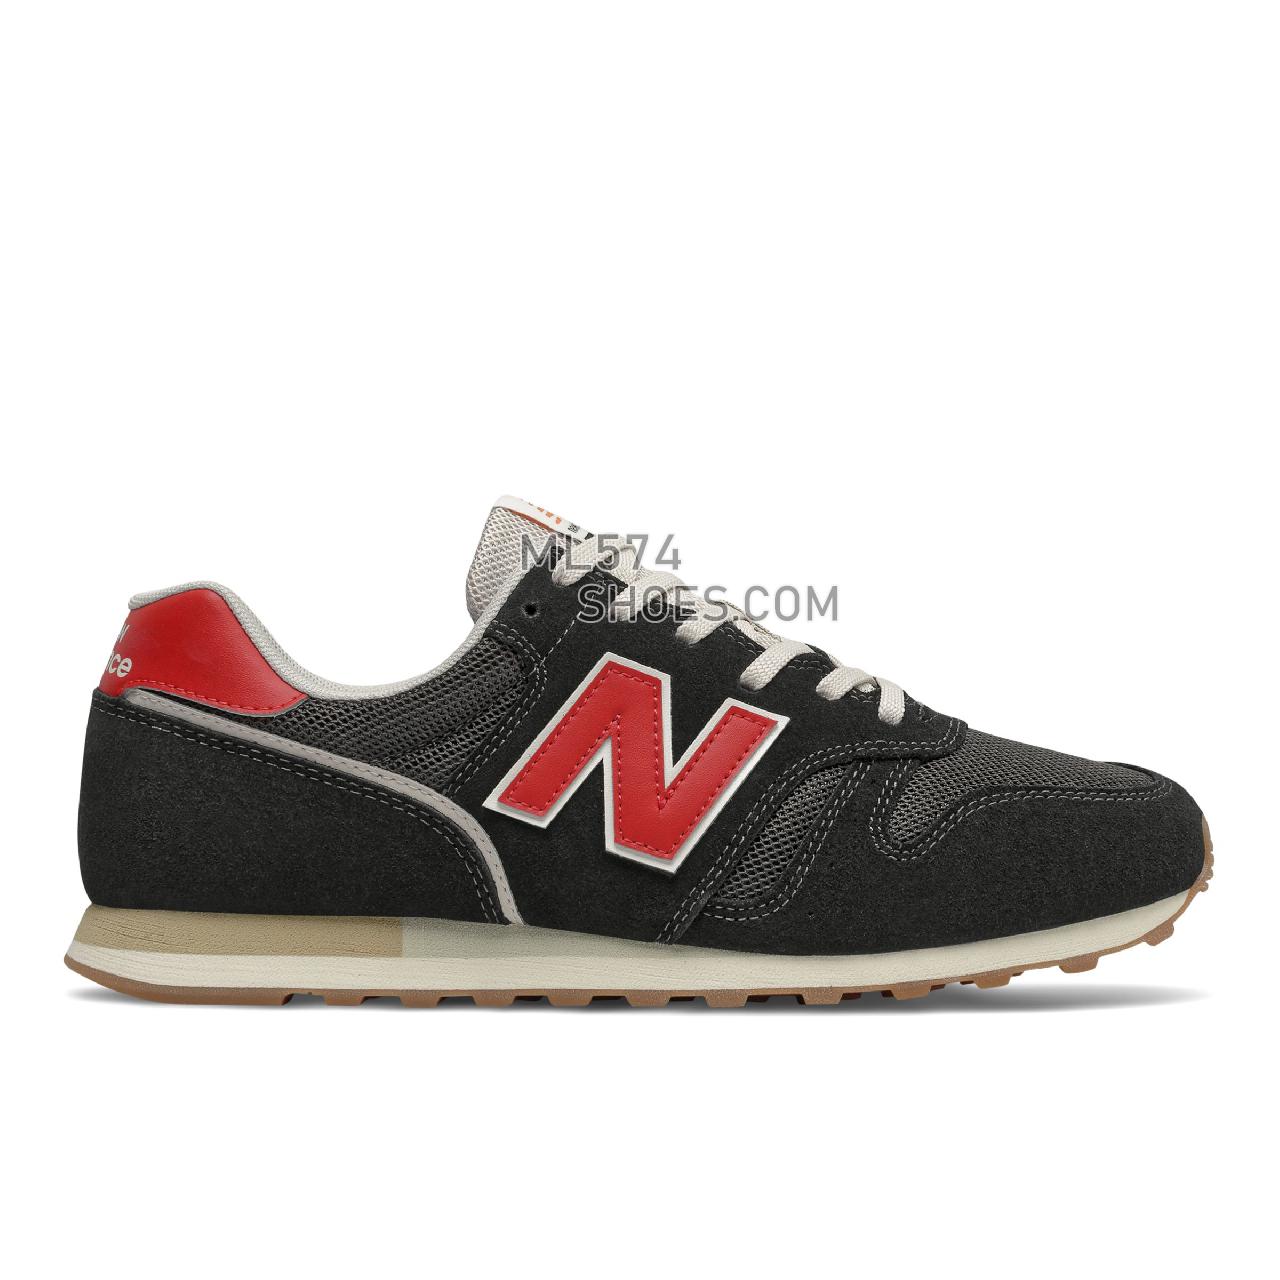 New Balance 373v2 - Men's Classic Sneakers - Black with Team Red - ML373HL2